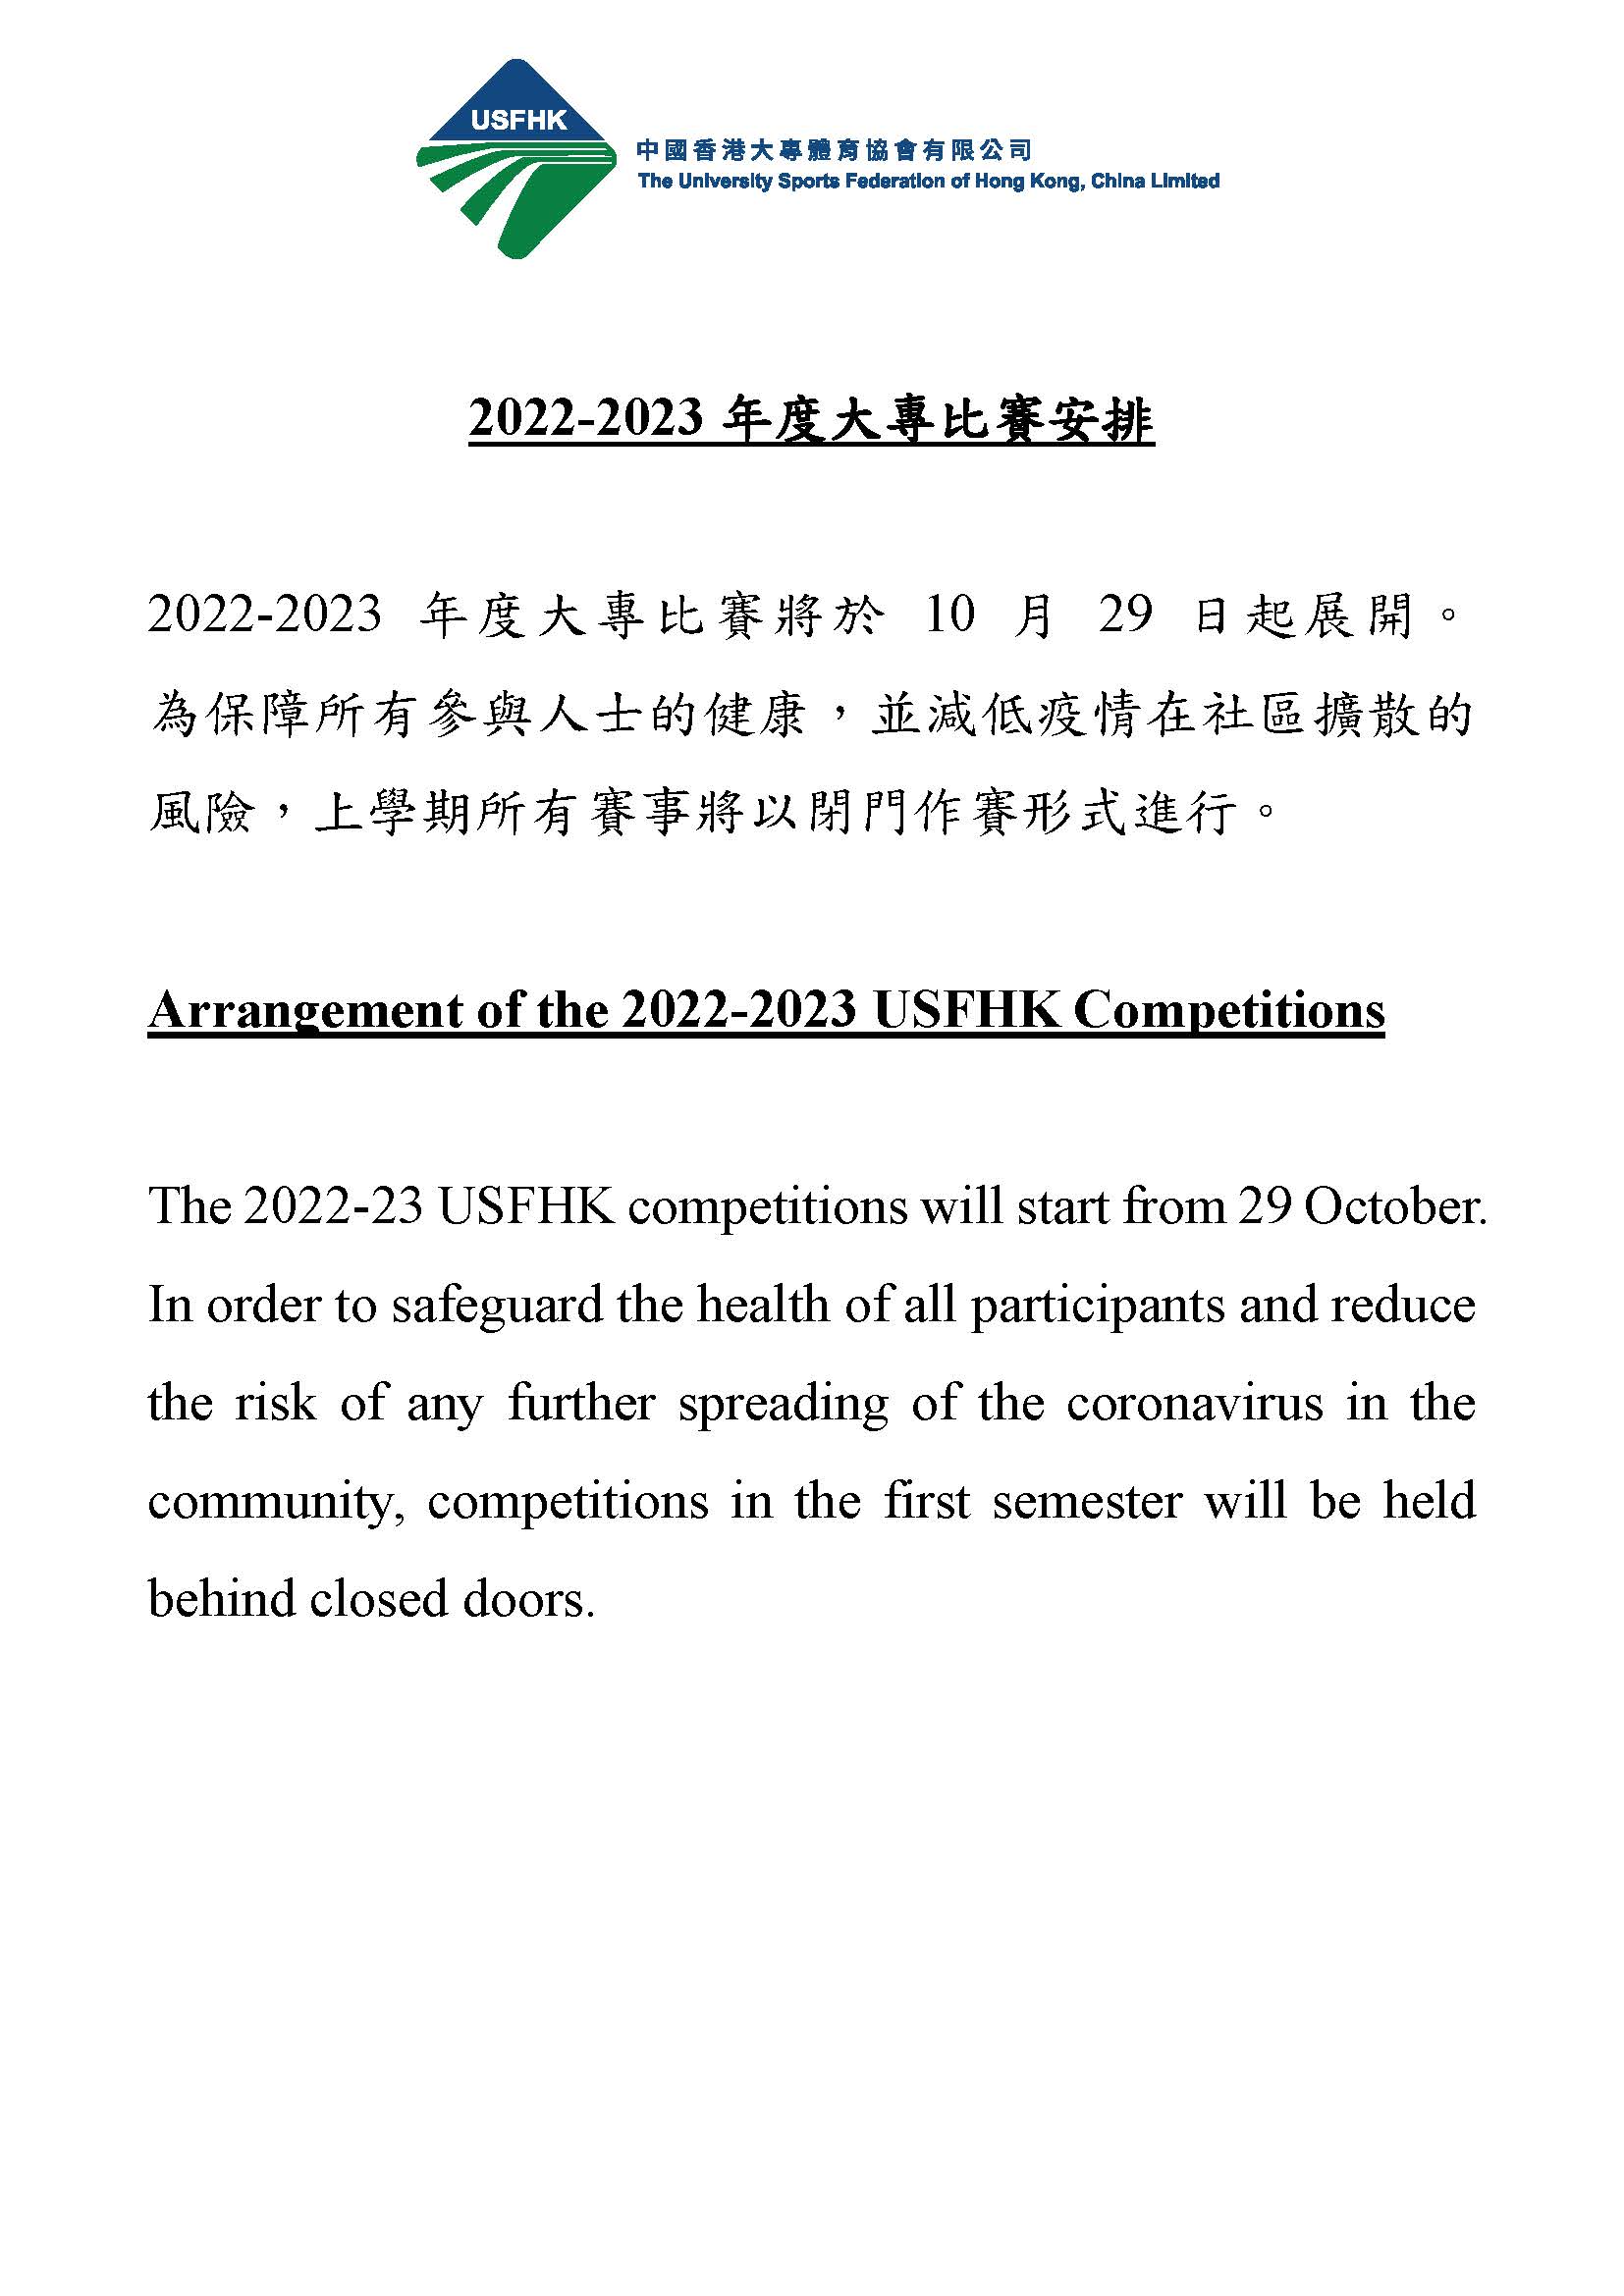 Arrangement of the 2022-2023 USFHK Competitions